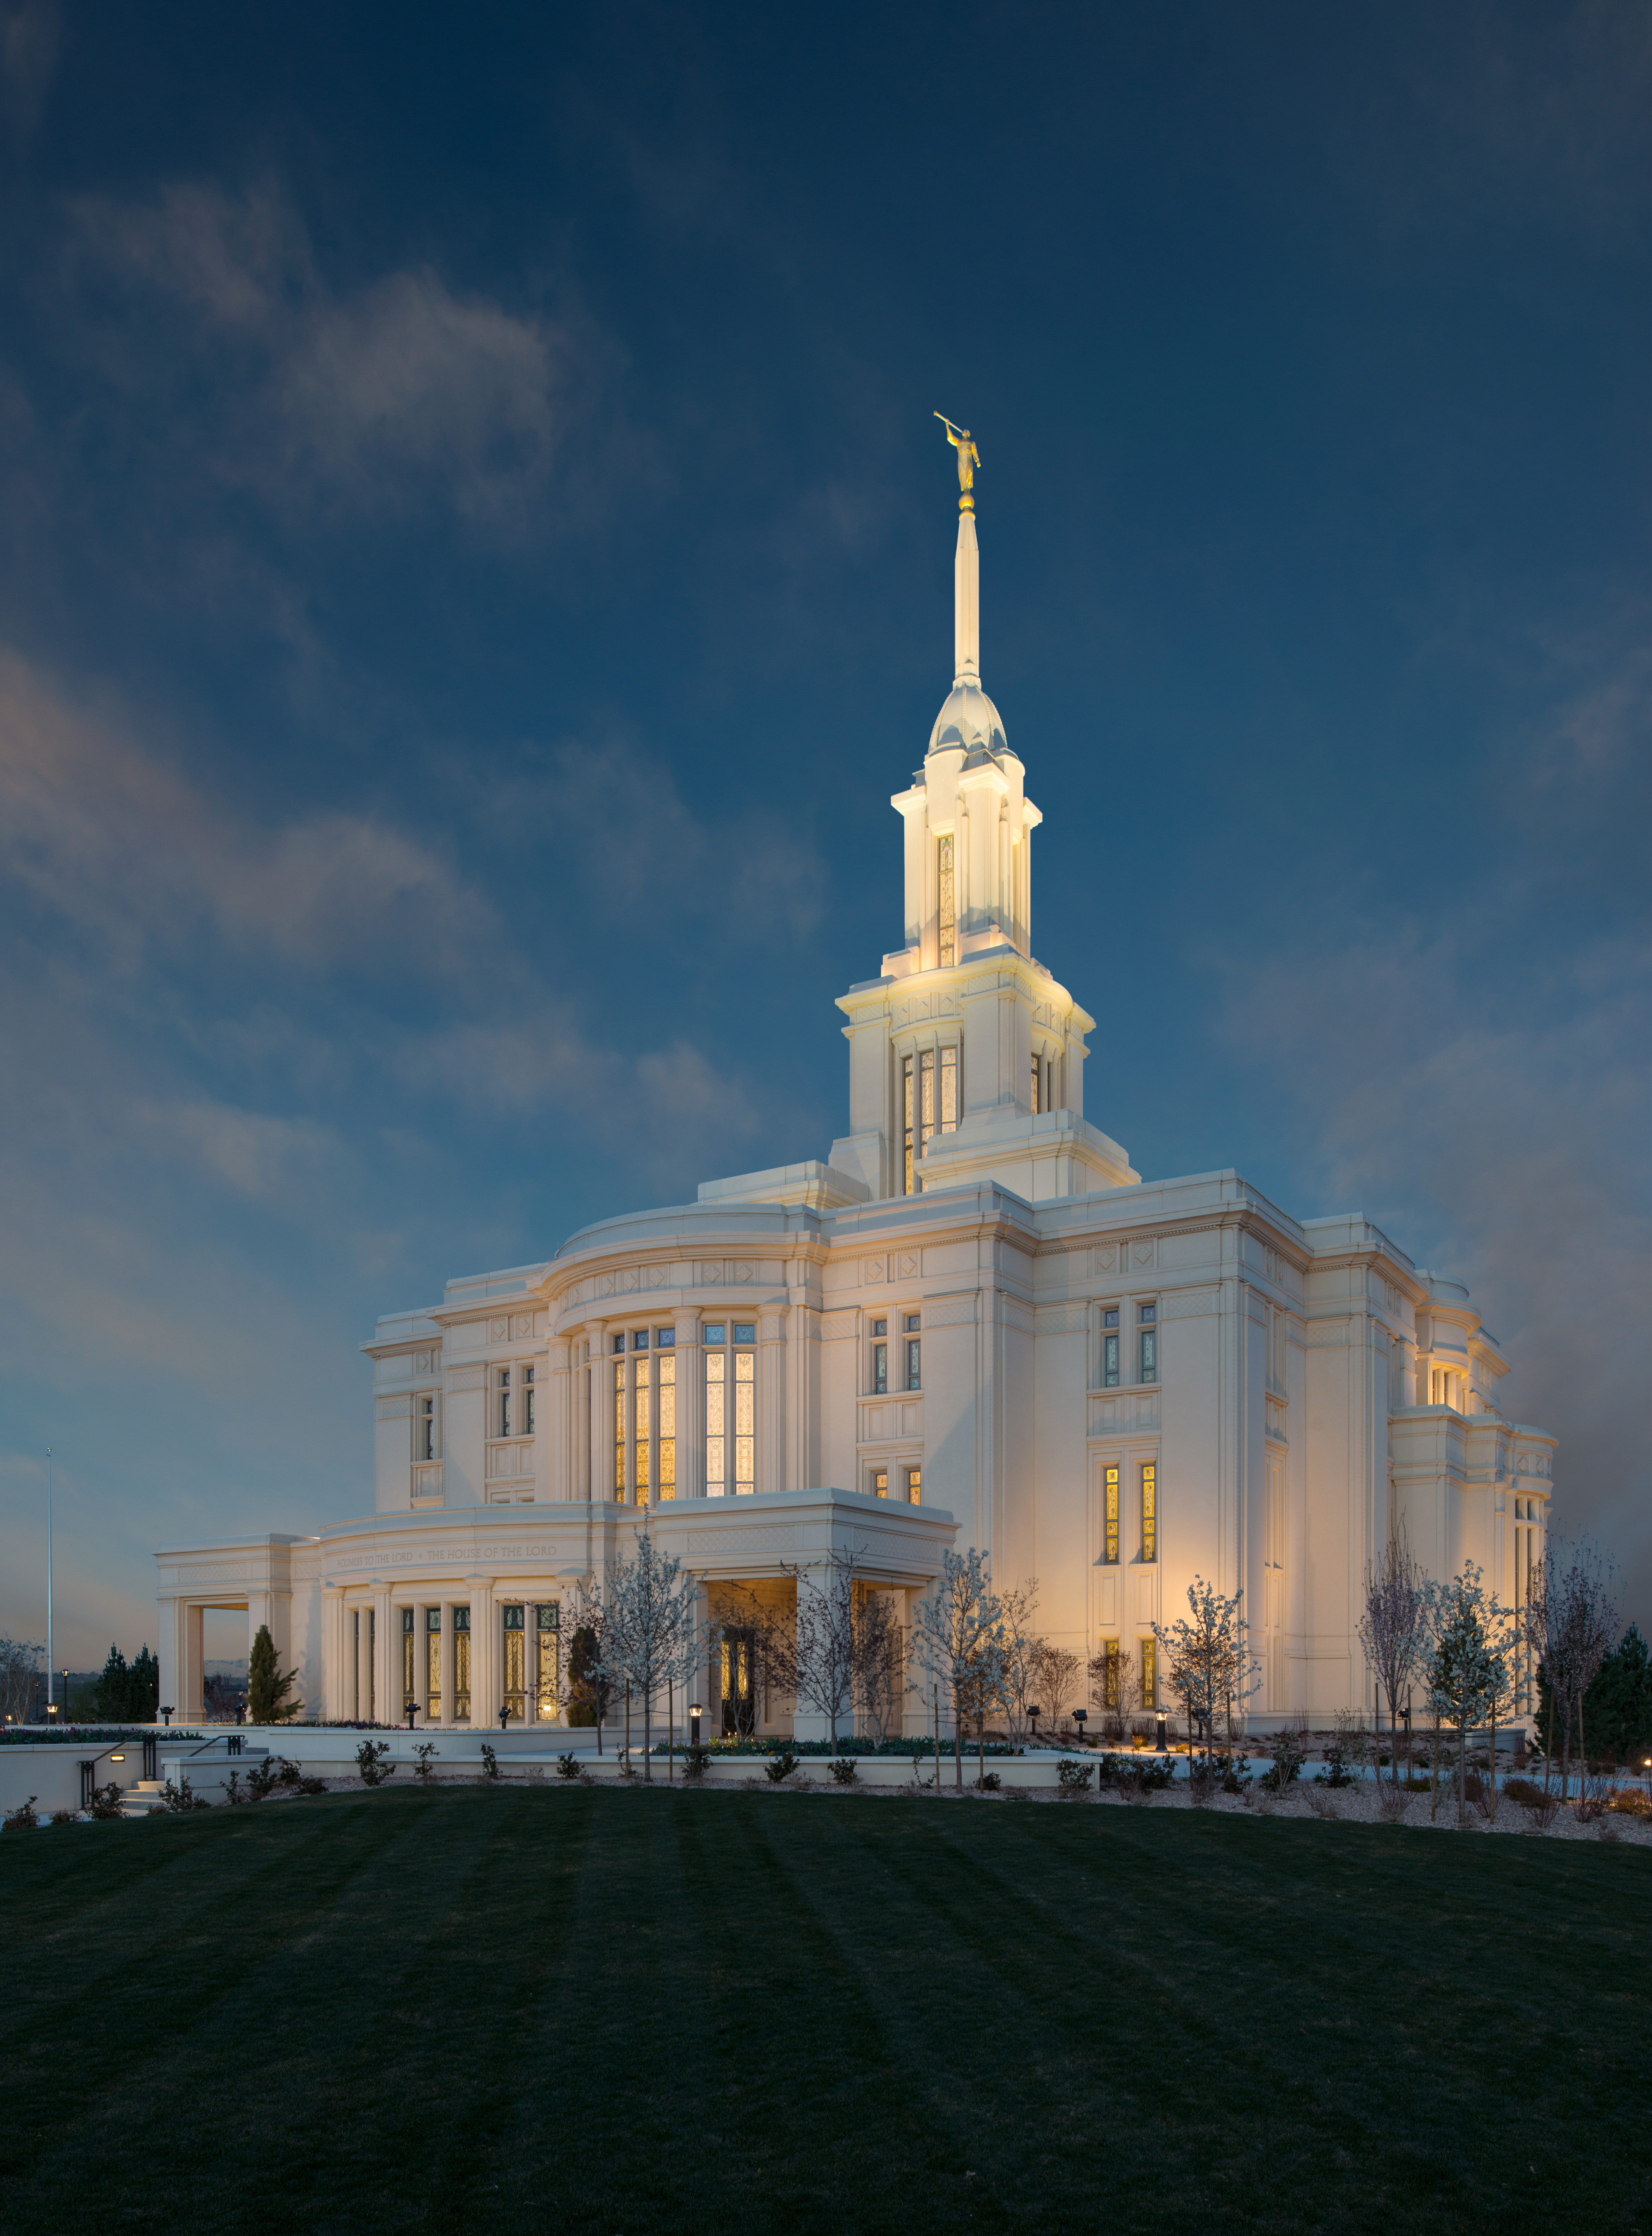 The Payson Utah Temple, a white building with a steeple, lit by external lights.